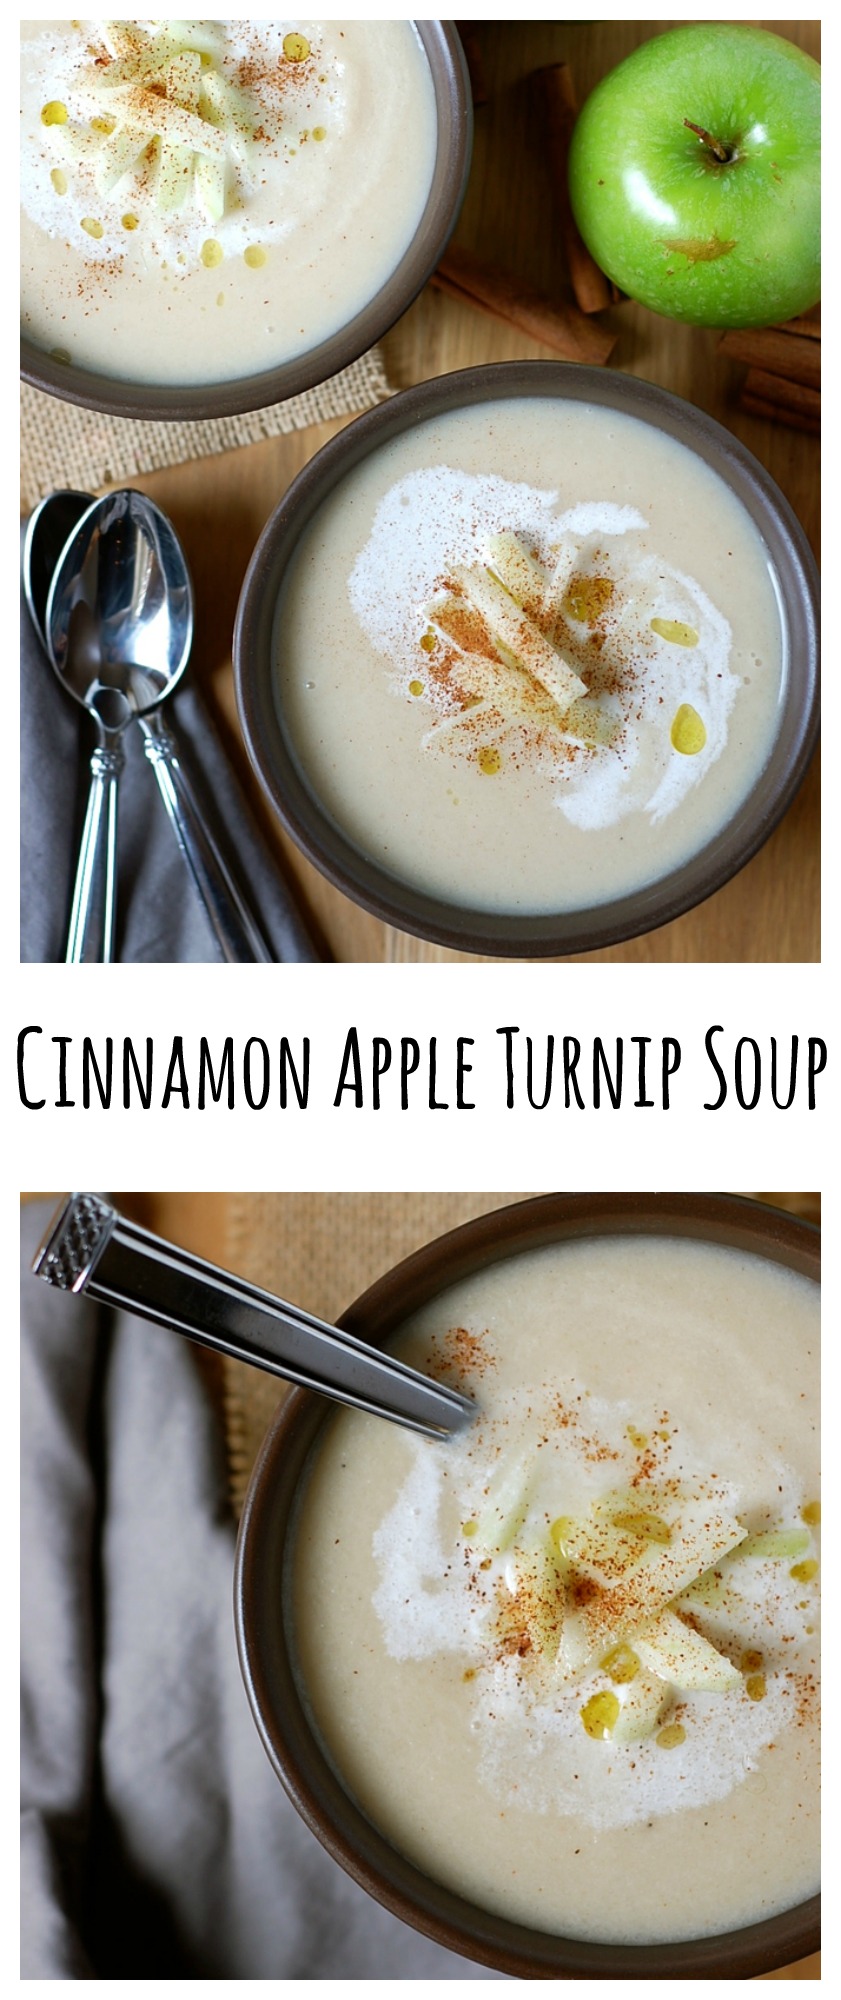 This gluten-free cinnamon apple turnip soup is the perfect, soul-warming winter meal.